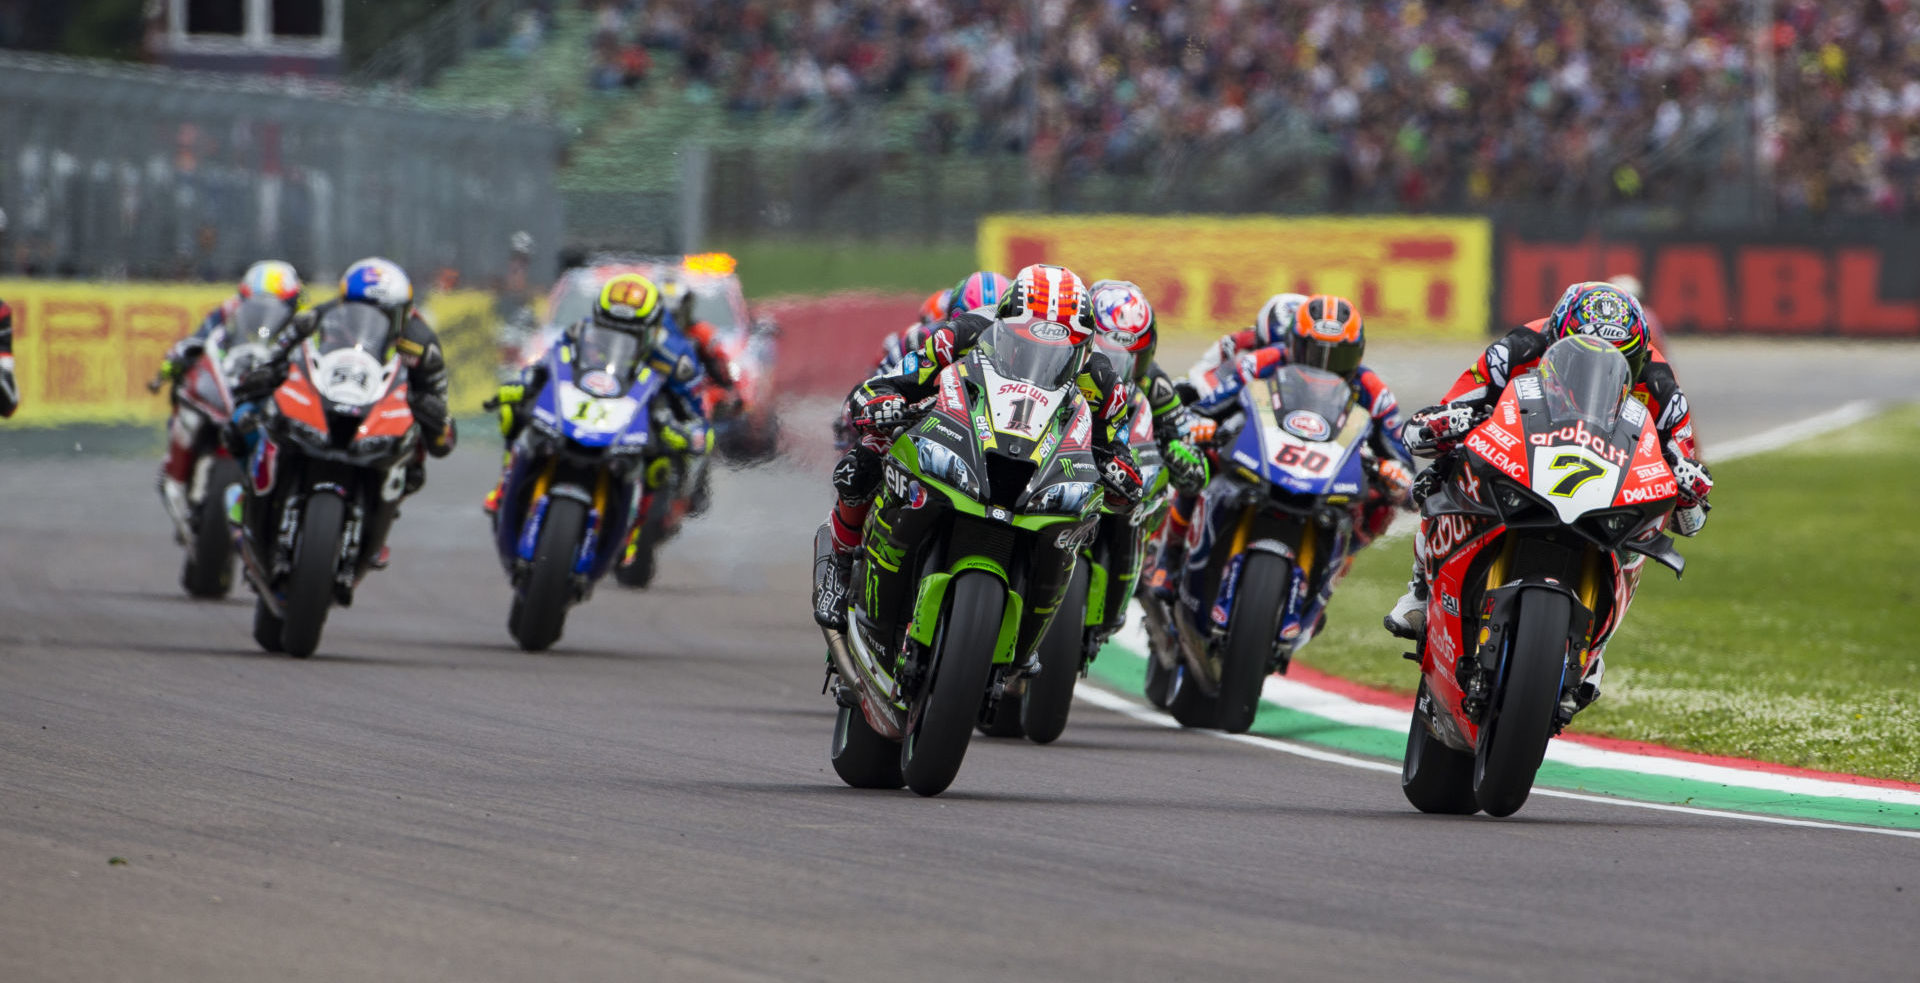 Action from World Superbike Race One at Imola in 2019. Photo courtesy of Kawasaki.